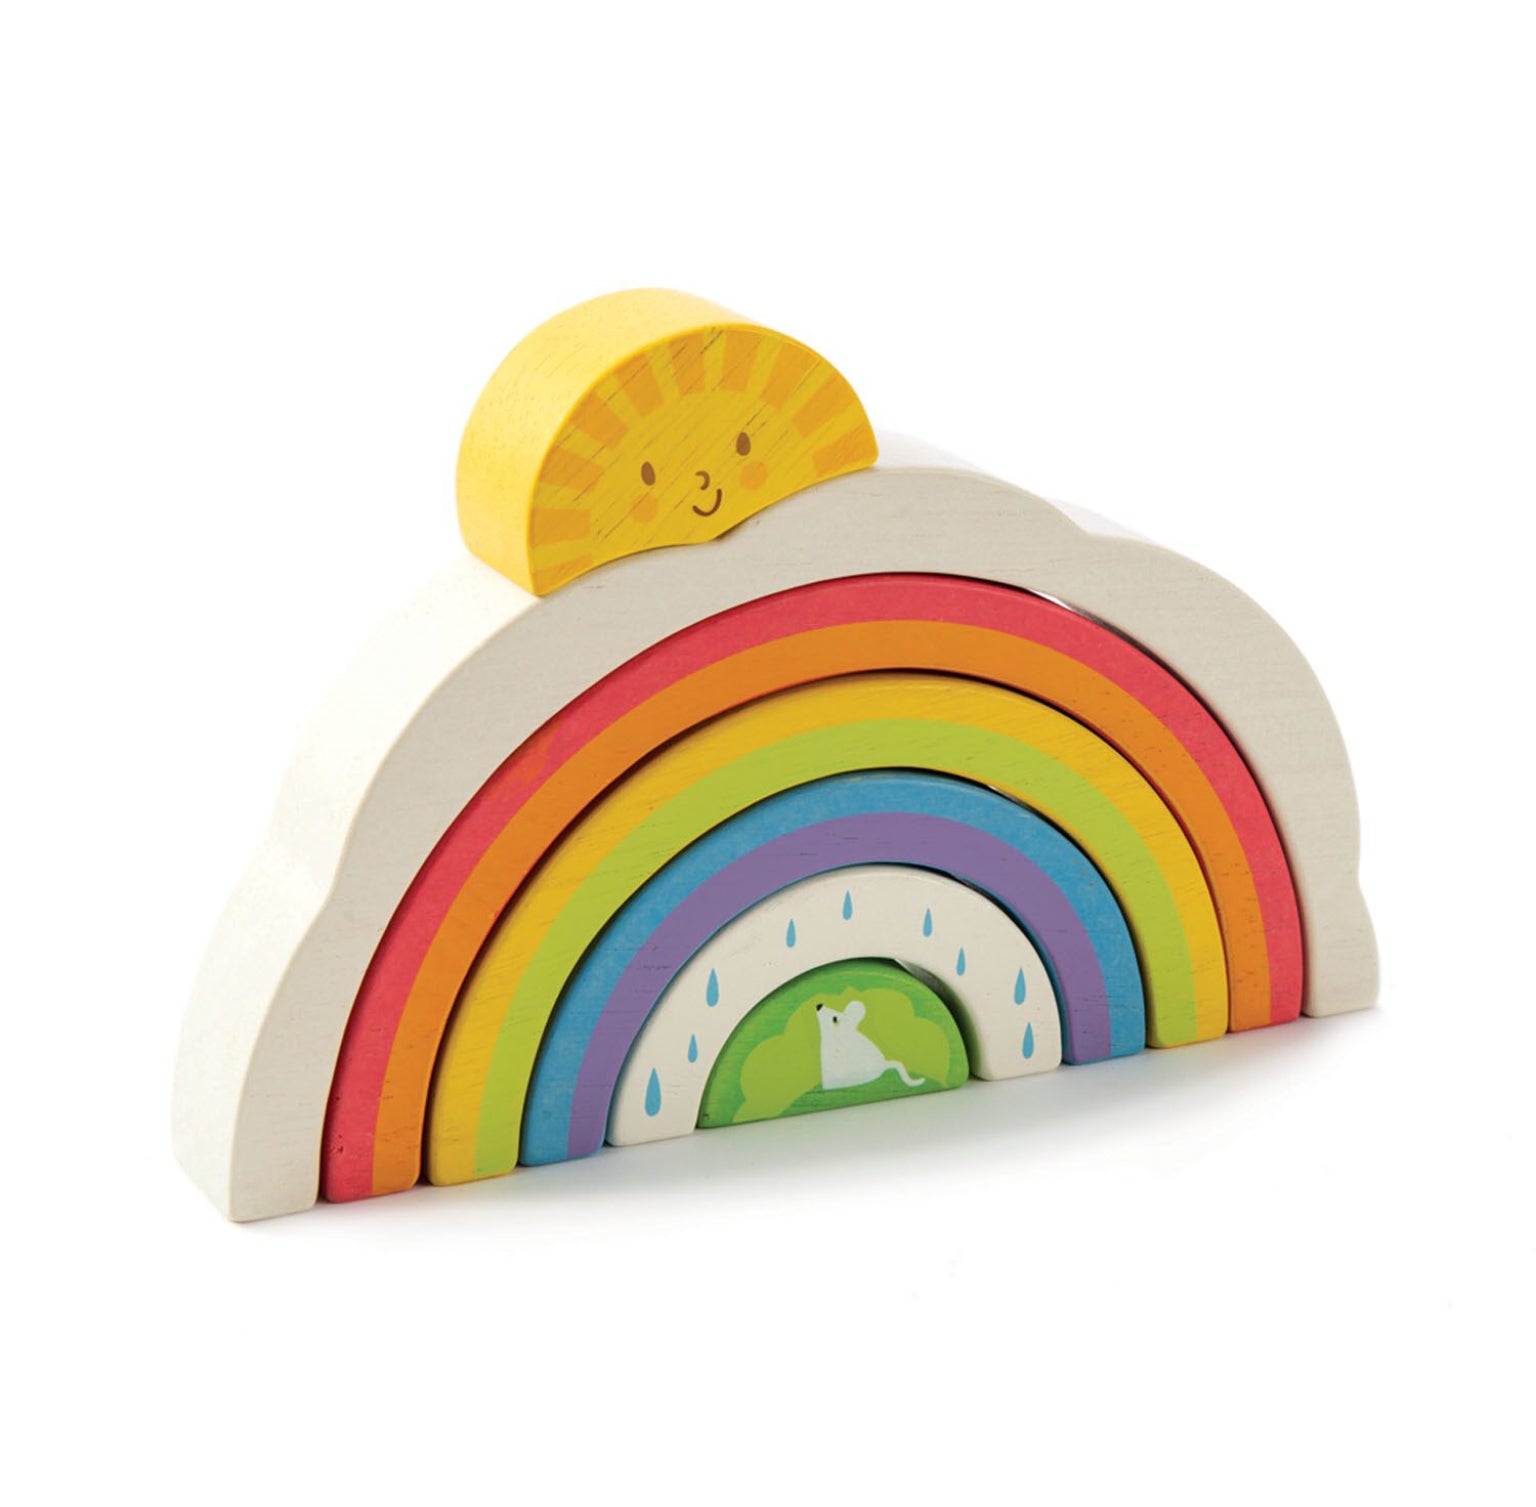 Tenderleaf Toys Rainbow Tunnel Wooden Rainbow Puzzle Stacking Toy